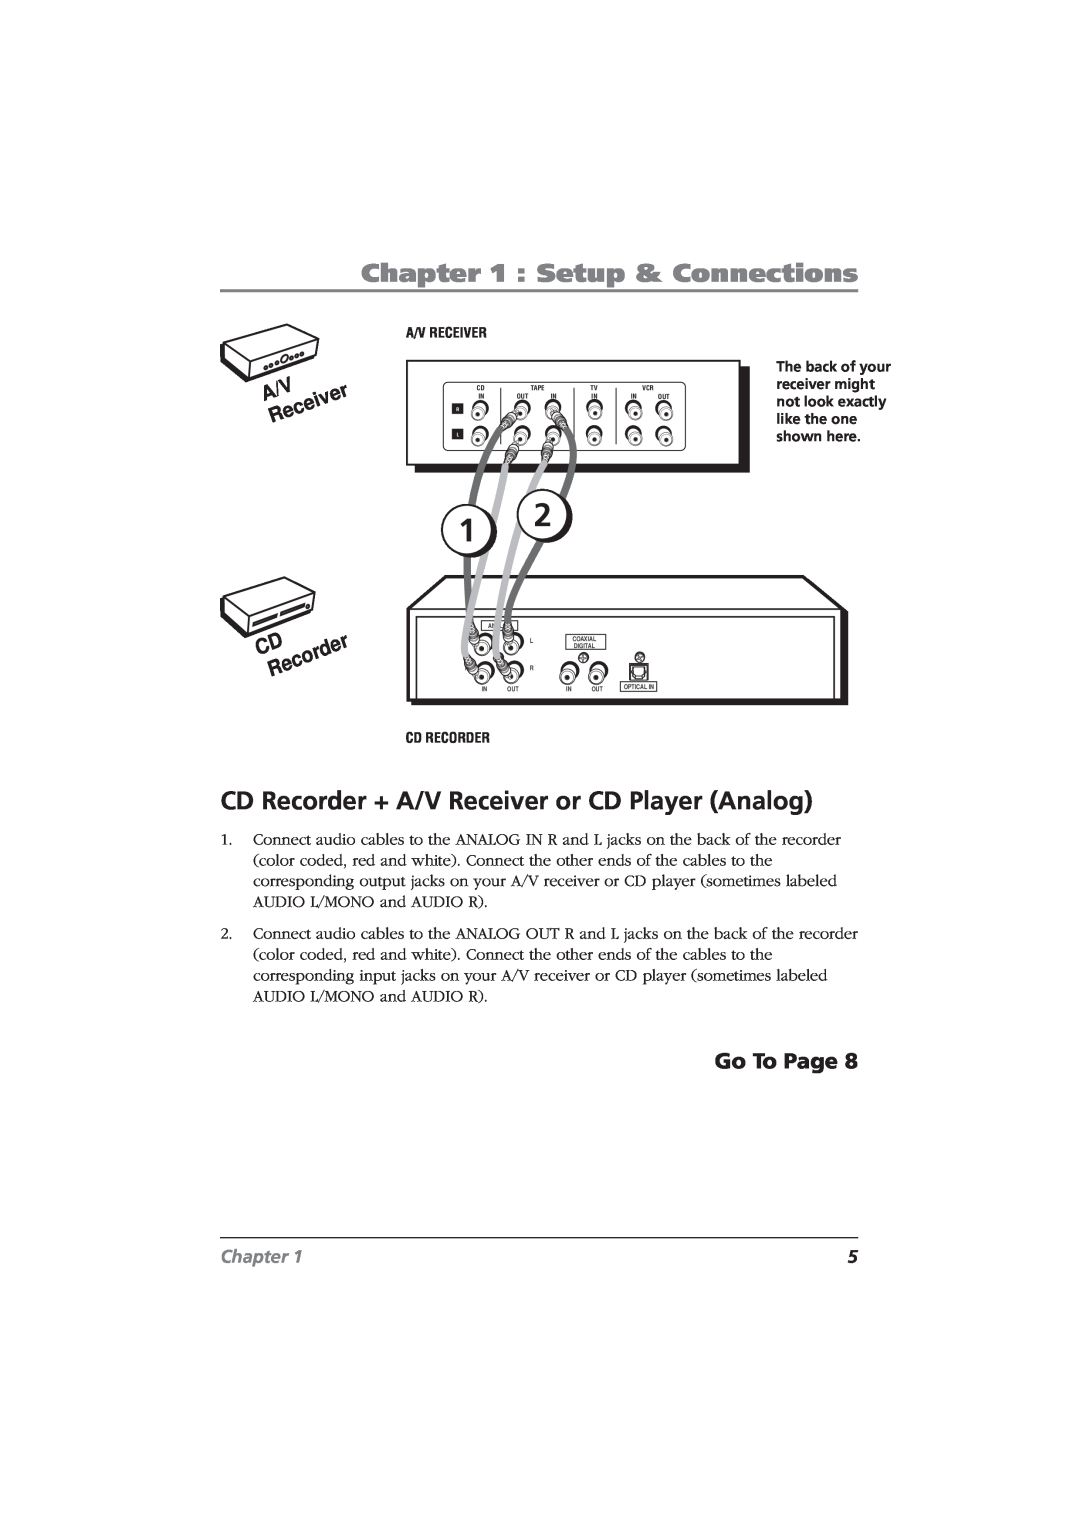 RCA CDRW120 manual CD Recorder + A/V Receiver or CD Player Analog, Setup & Connections, Chapter 